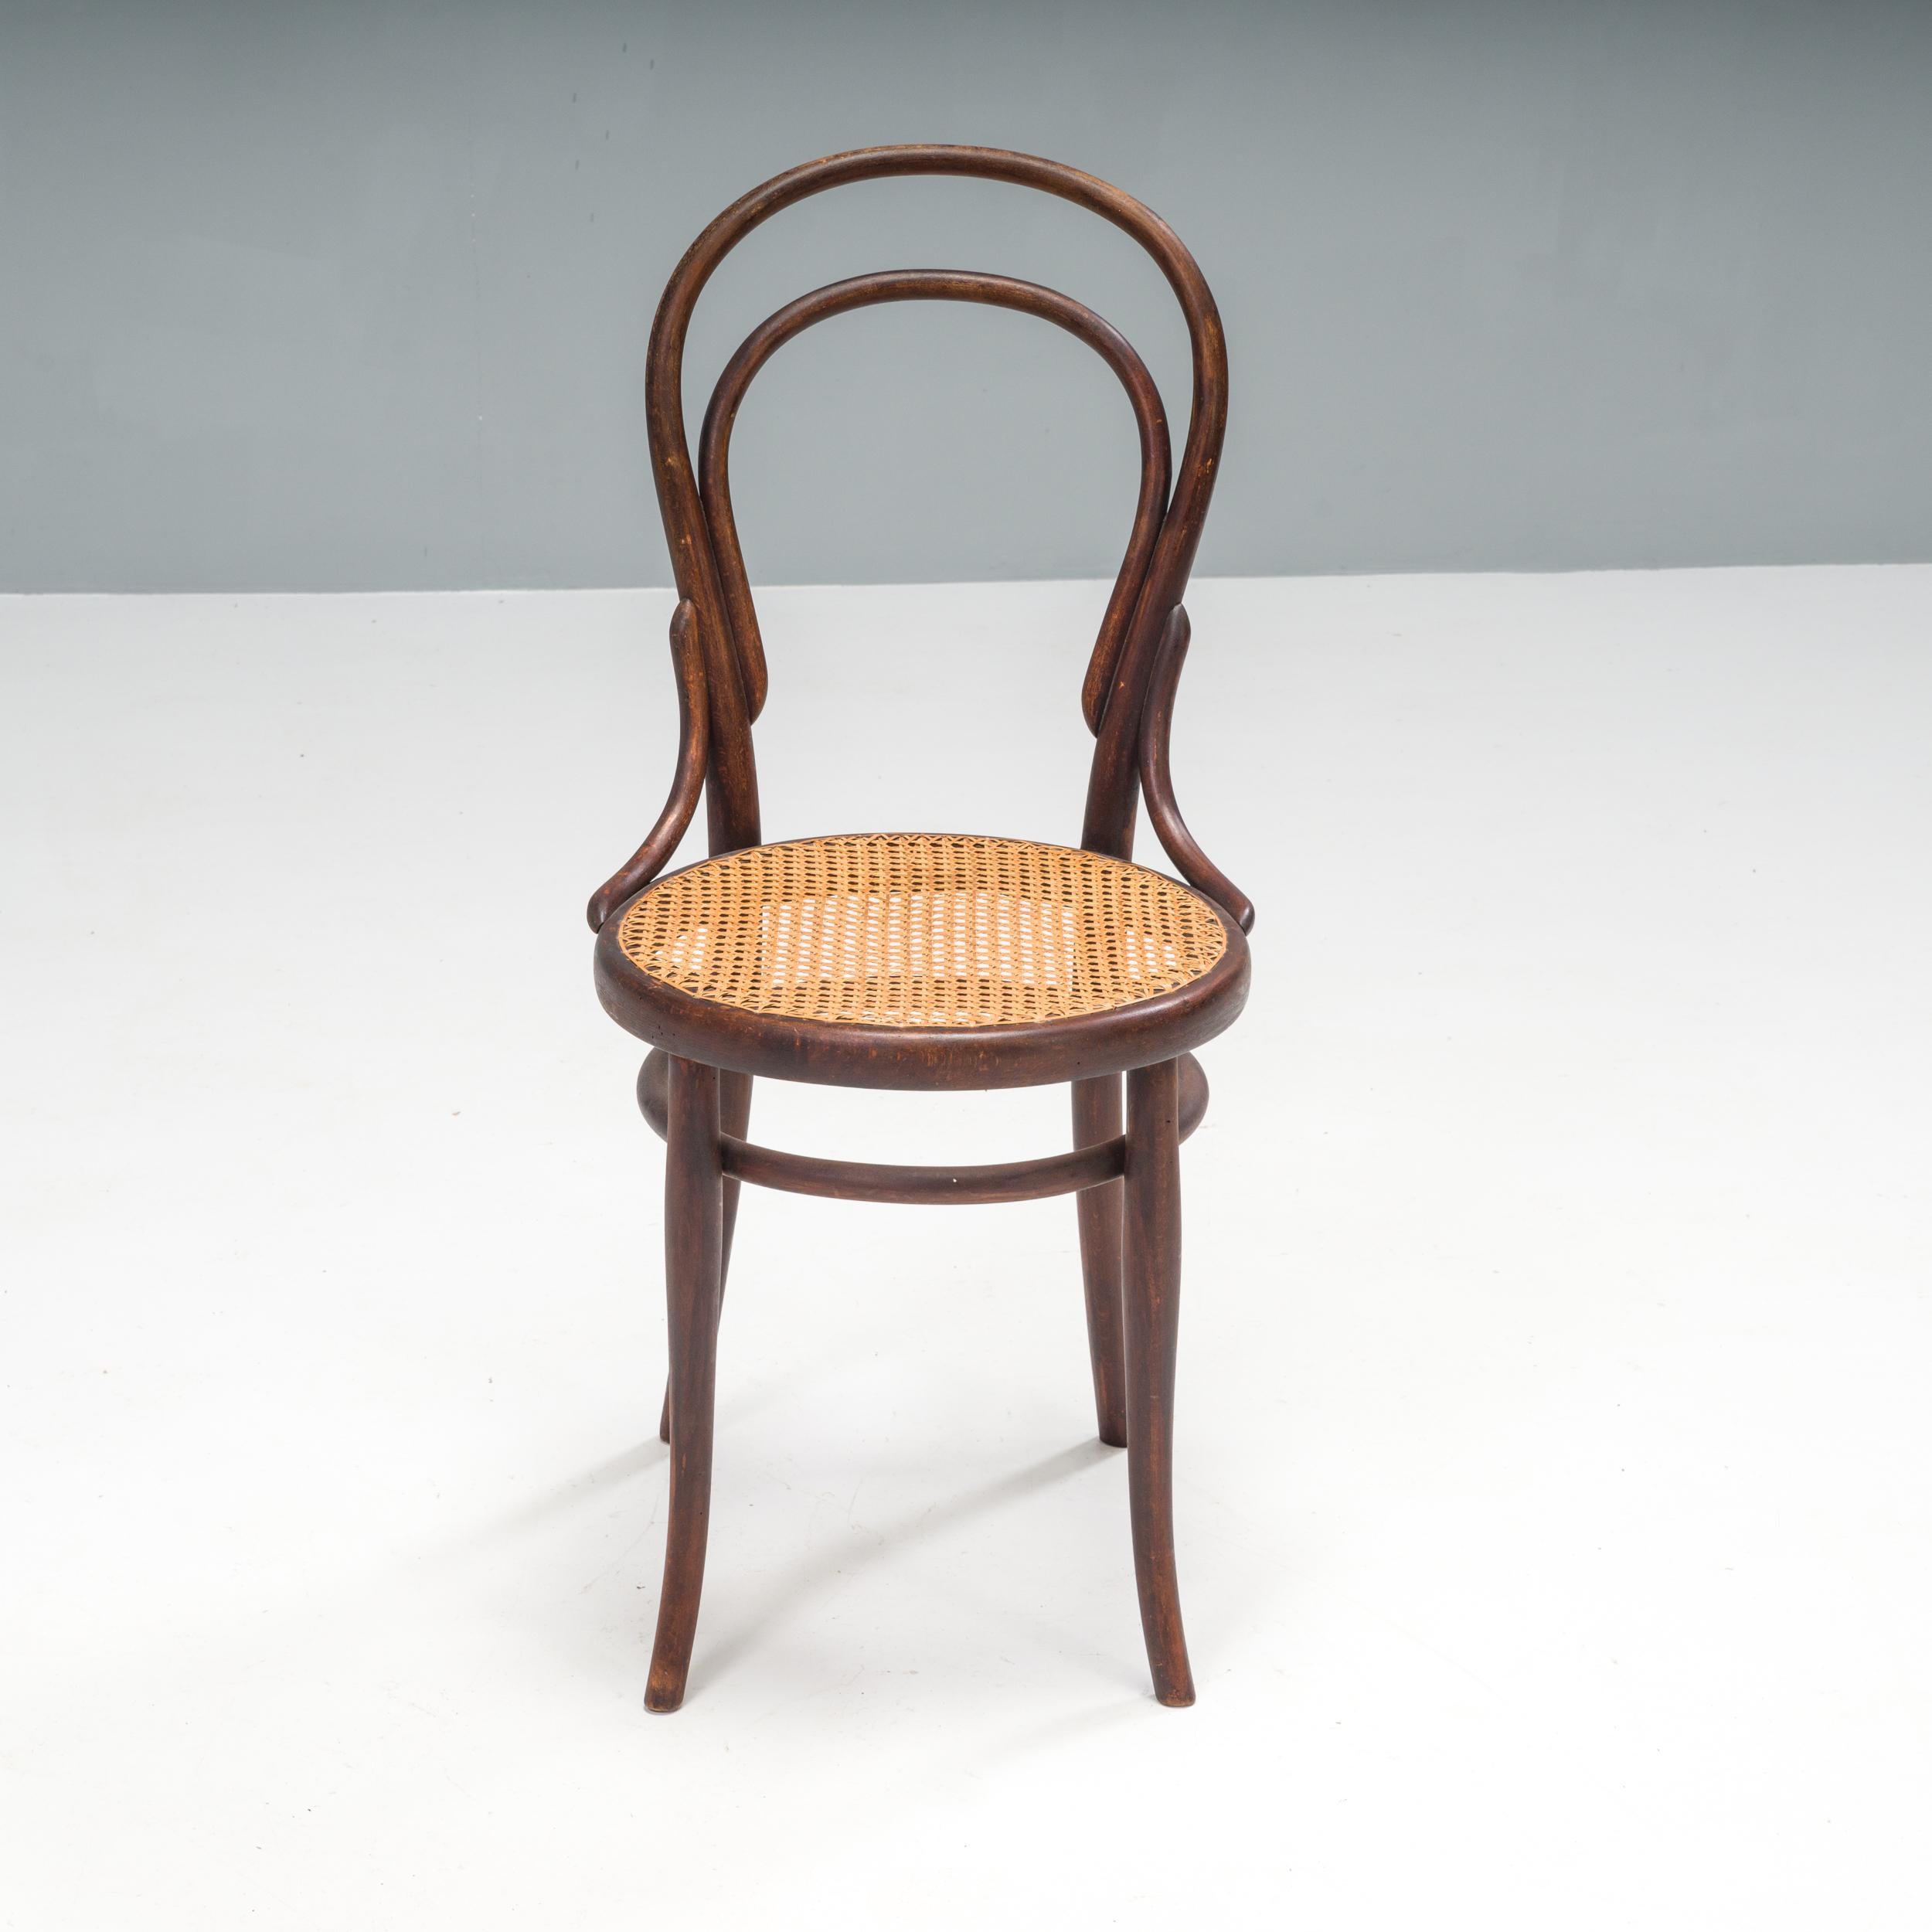 Caning Michael Thonet No. 14 Bentwood Dining Chairs, Set of 6, Circa 1900